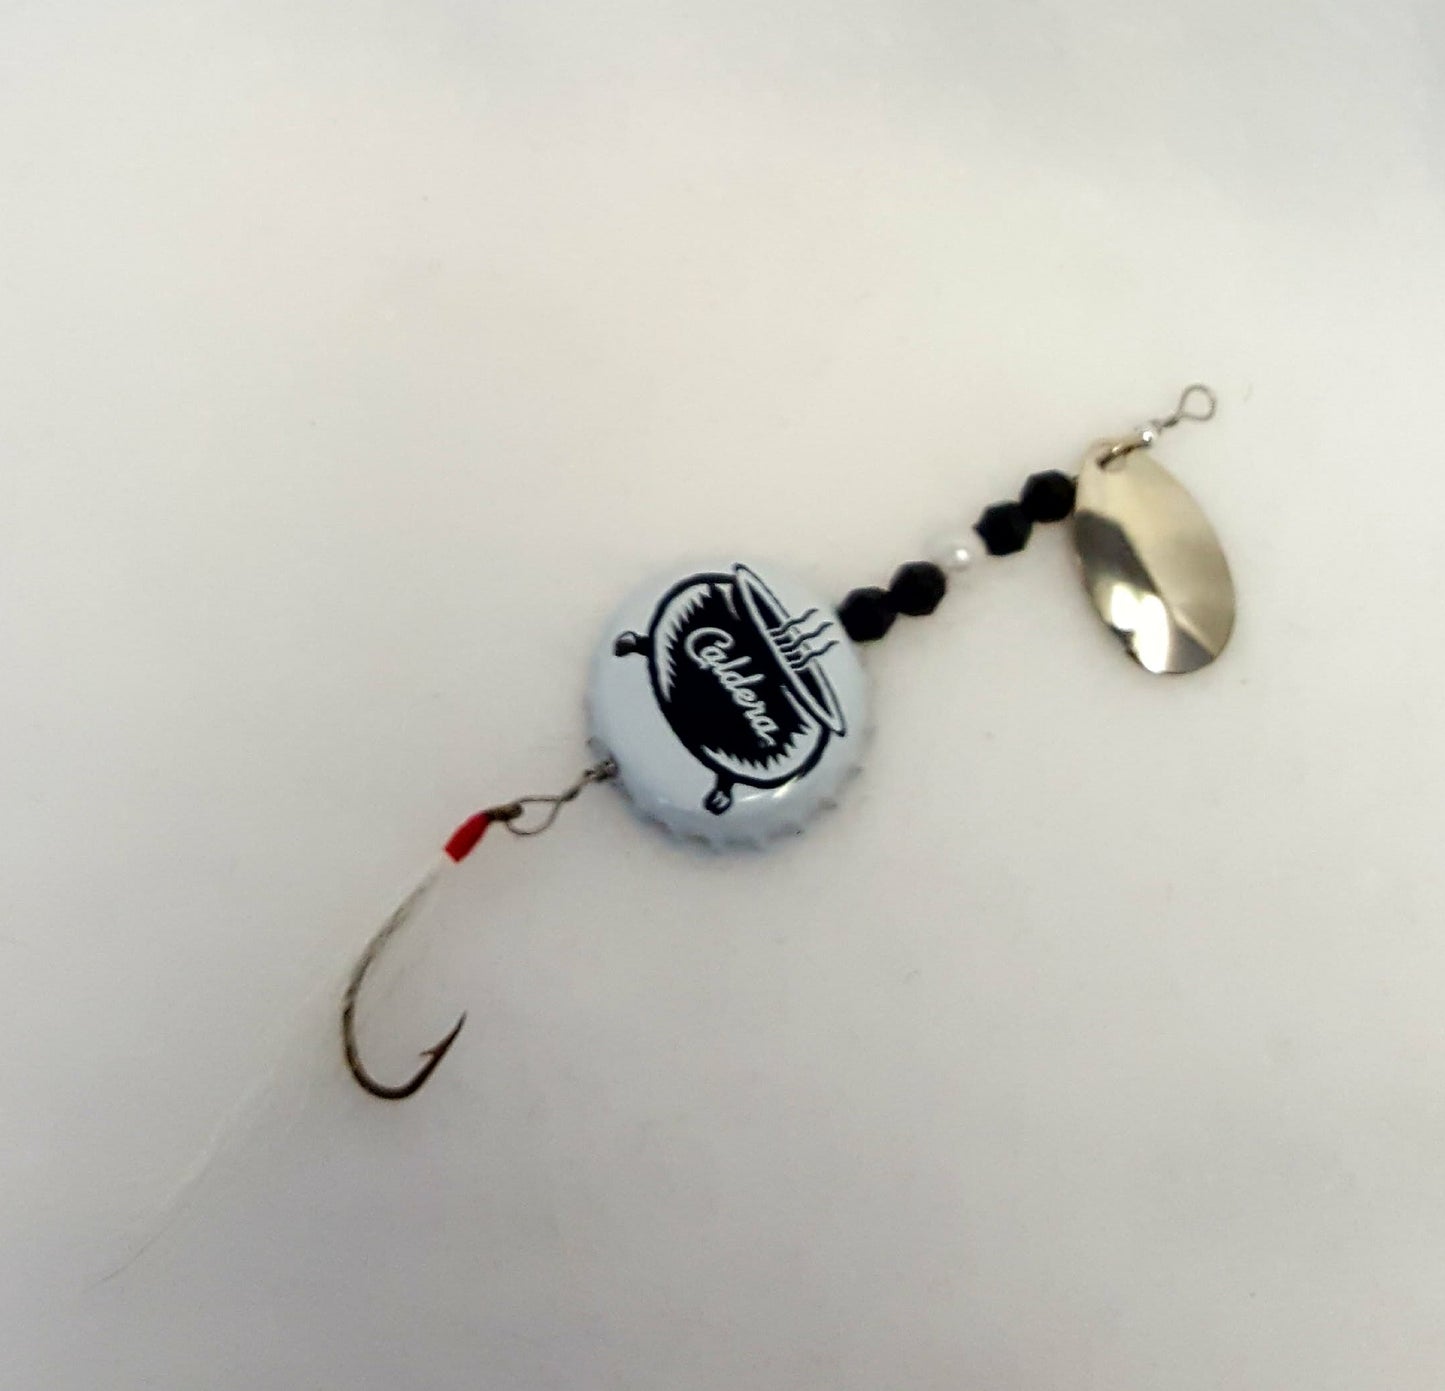 Lure has a white bottle cap with a cauldron, black & white beads, and white fly.